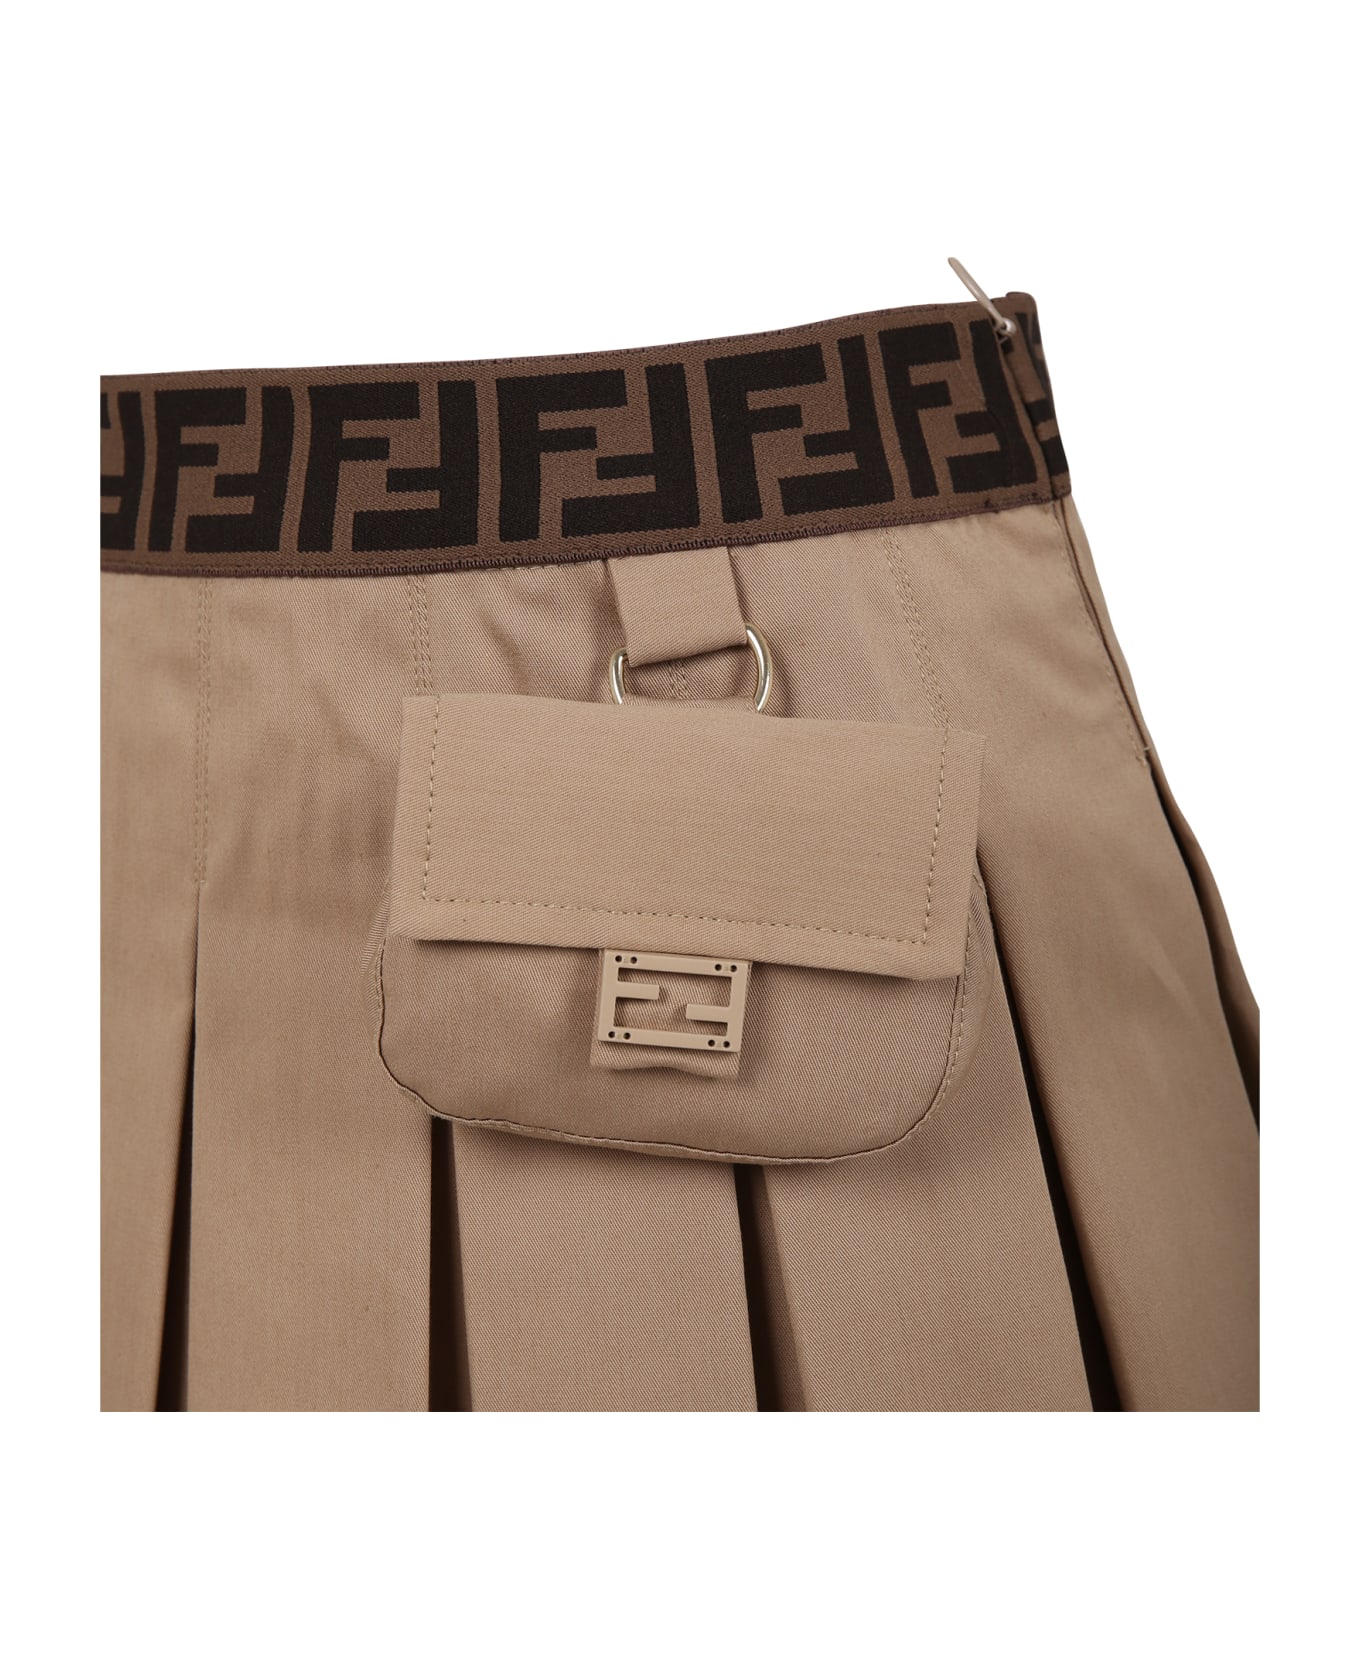 Fendi Beige Casual Skirt For Girls With Baguette And Ff Logo - Beige